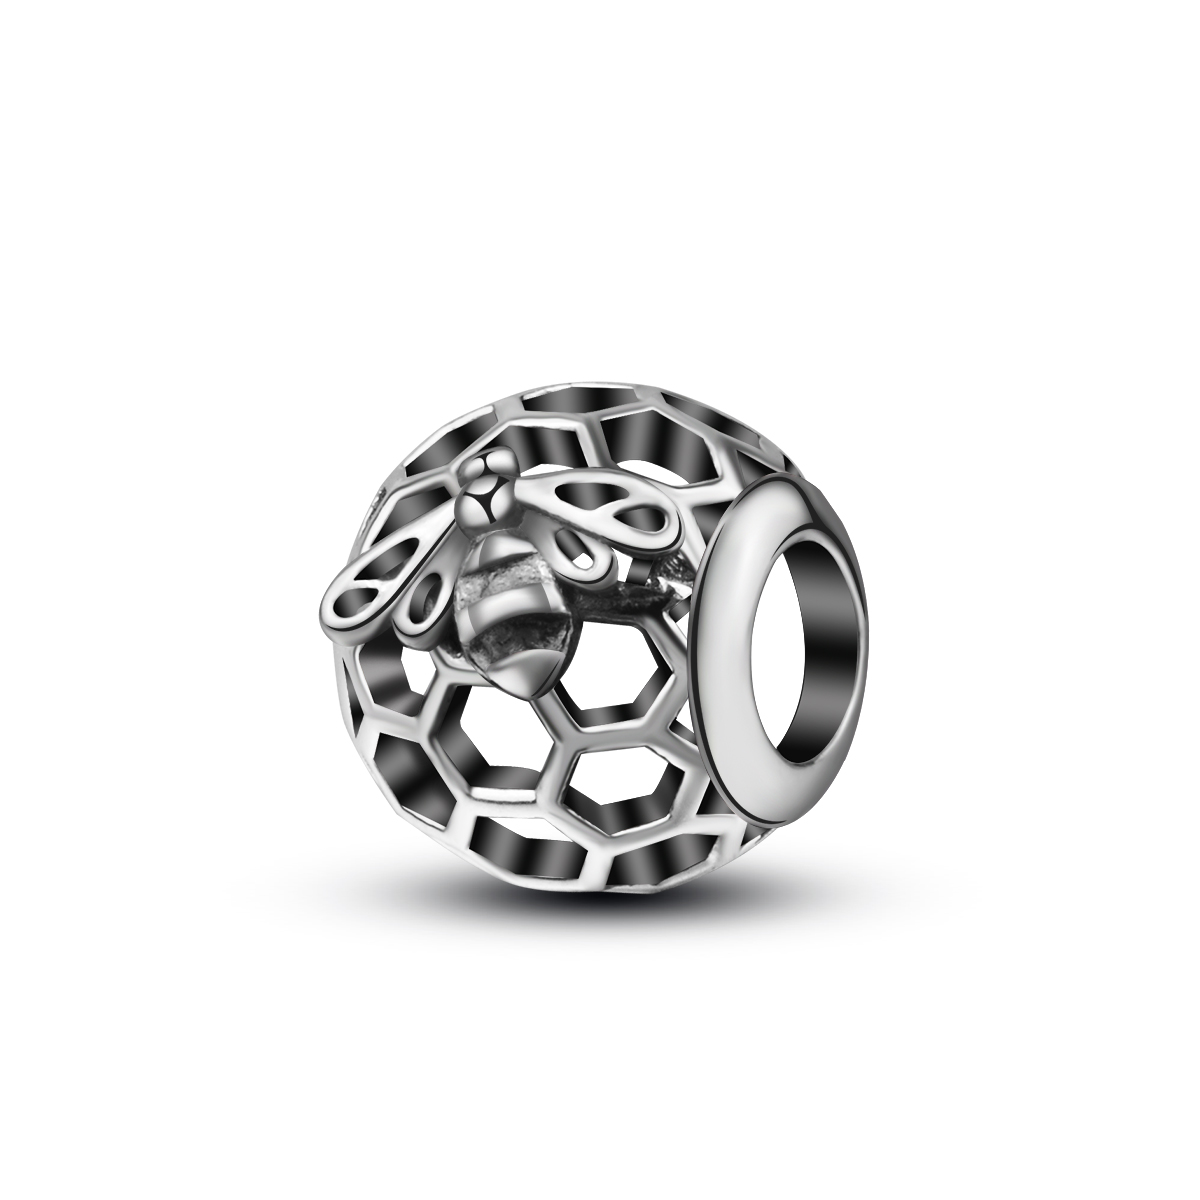 Jewelry Accessories Honeybee hollowed-out pattern 925 silver sterling silver pave beads